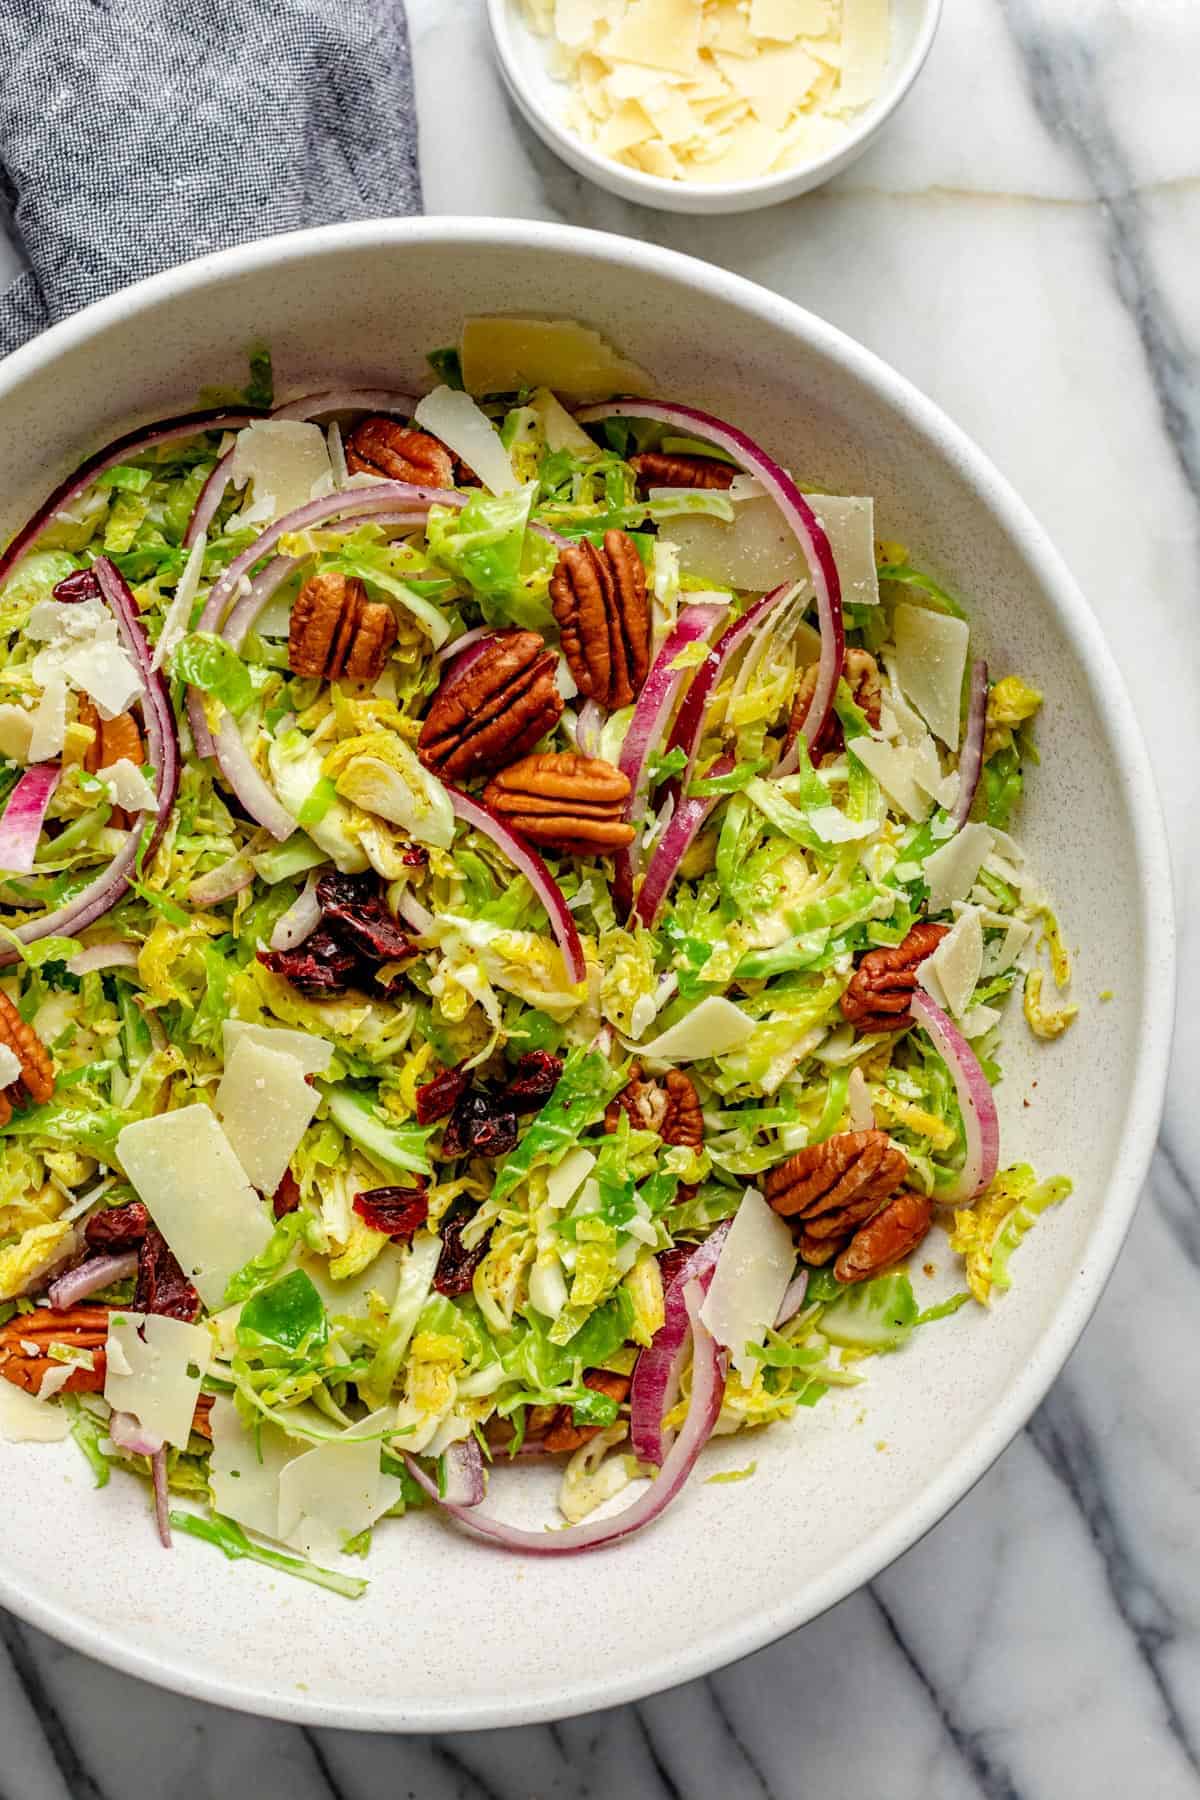 This Shaved Brussels Sprout Salad recipe is quick to prepare and only requires a lemon and olive oil dressing, tossed with raisins, walnuts and Parmesan